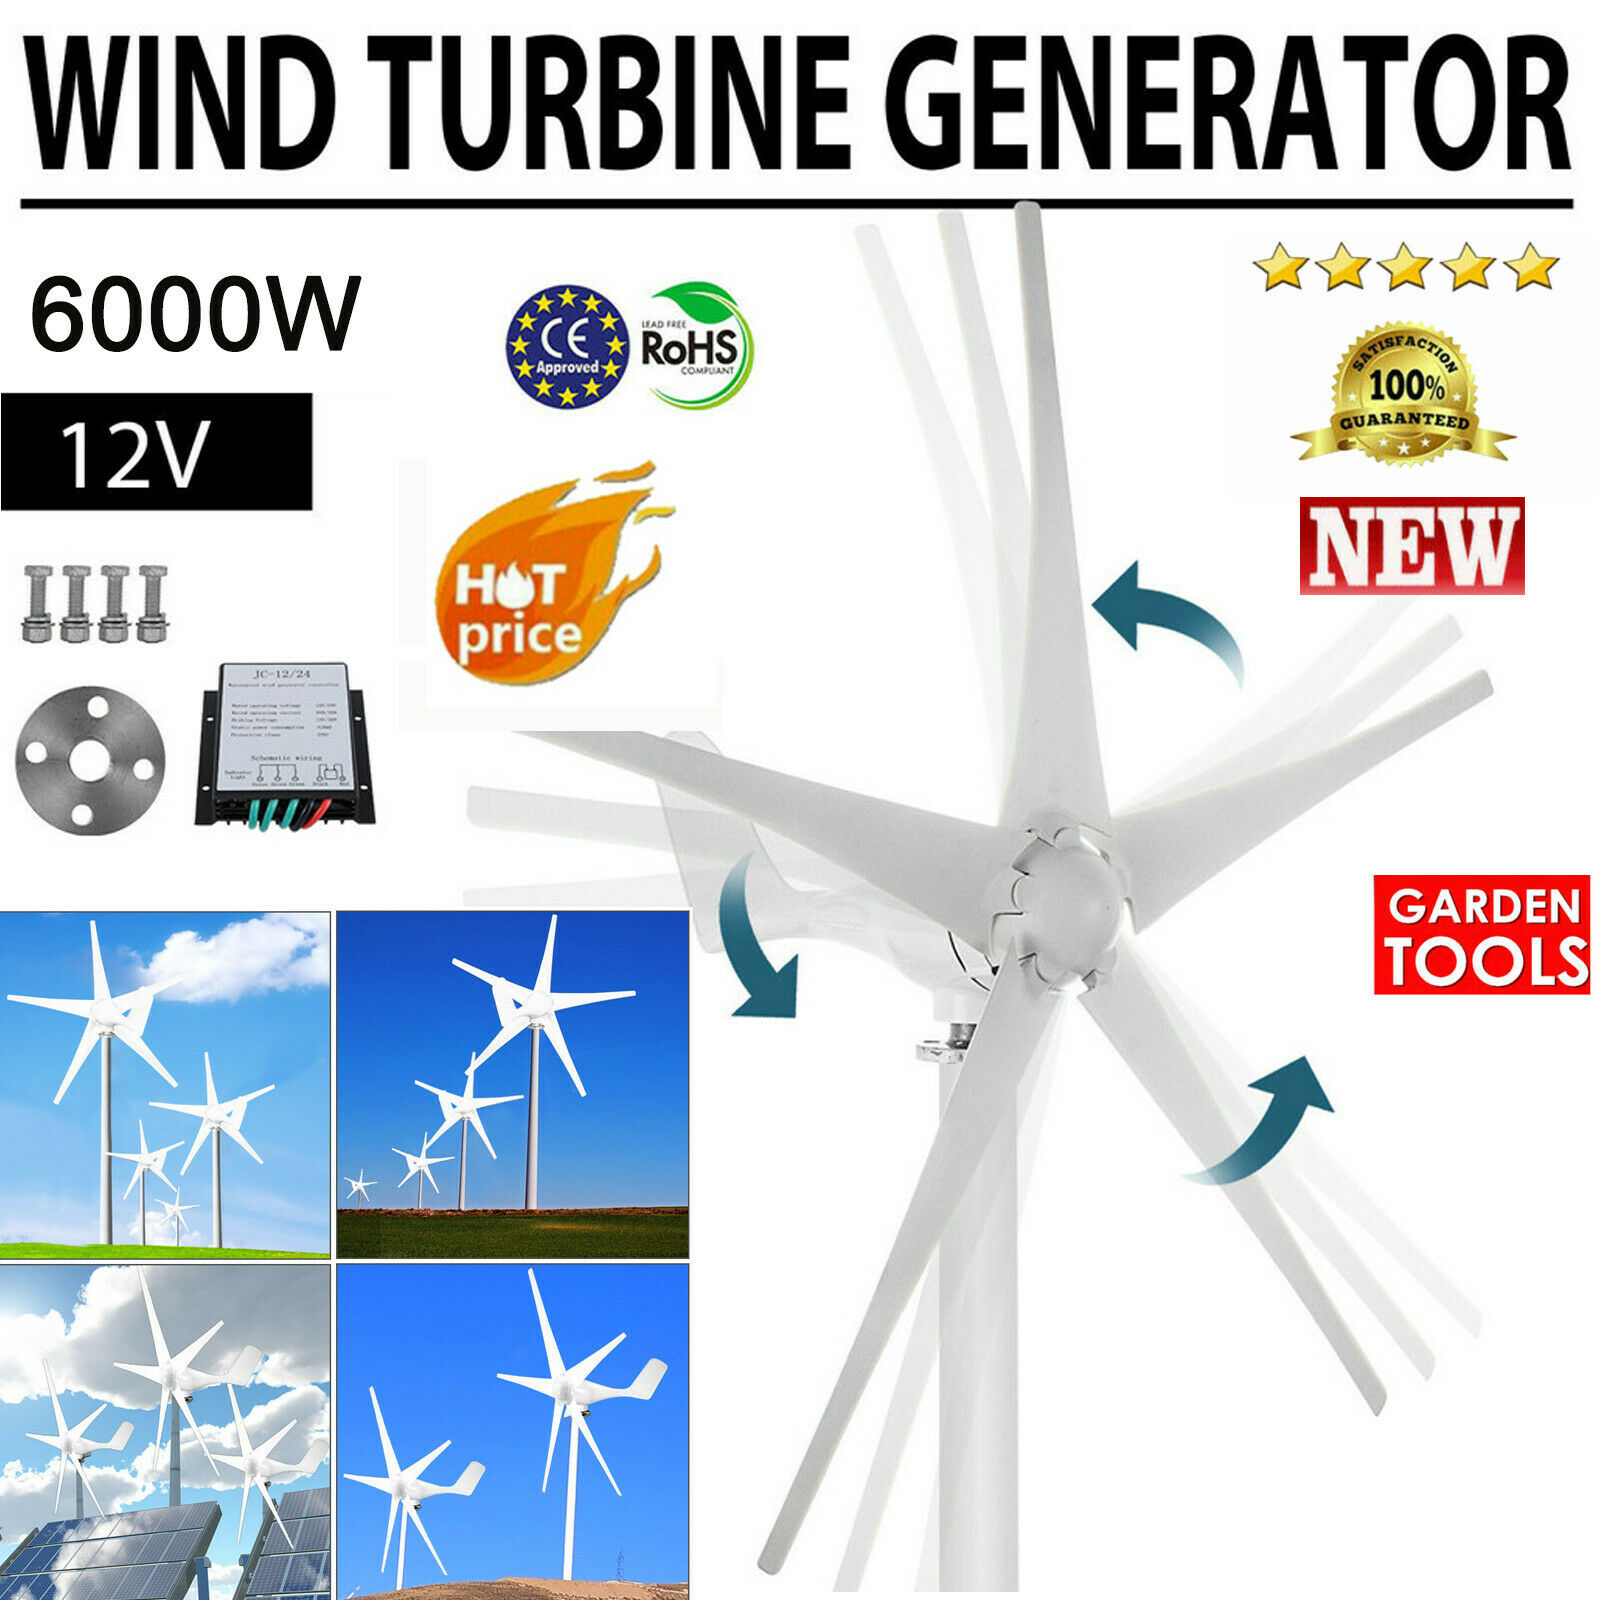 6000w Wind Turbine Generator Unit 5 Blades Dc 12v With Power Charge Controller